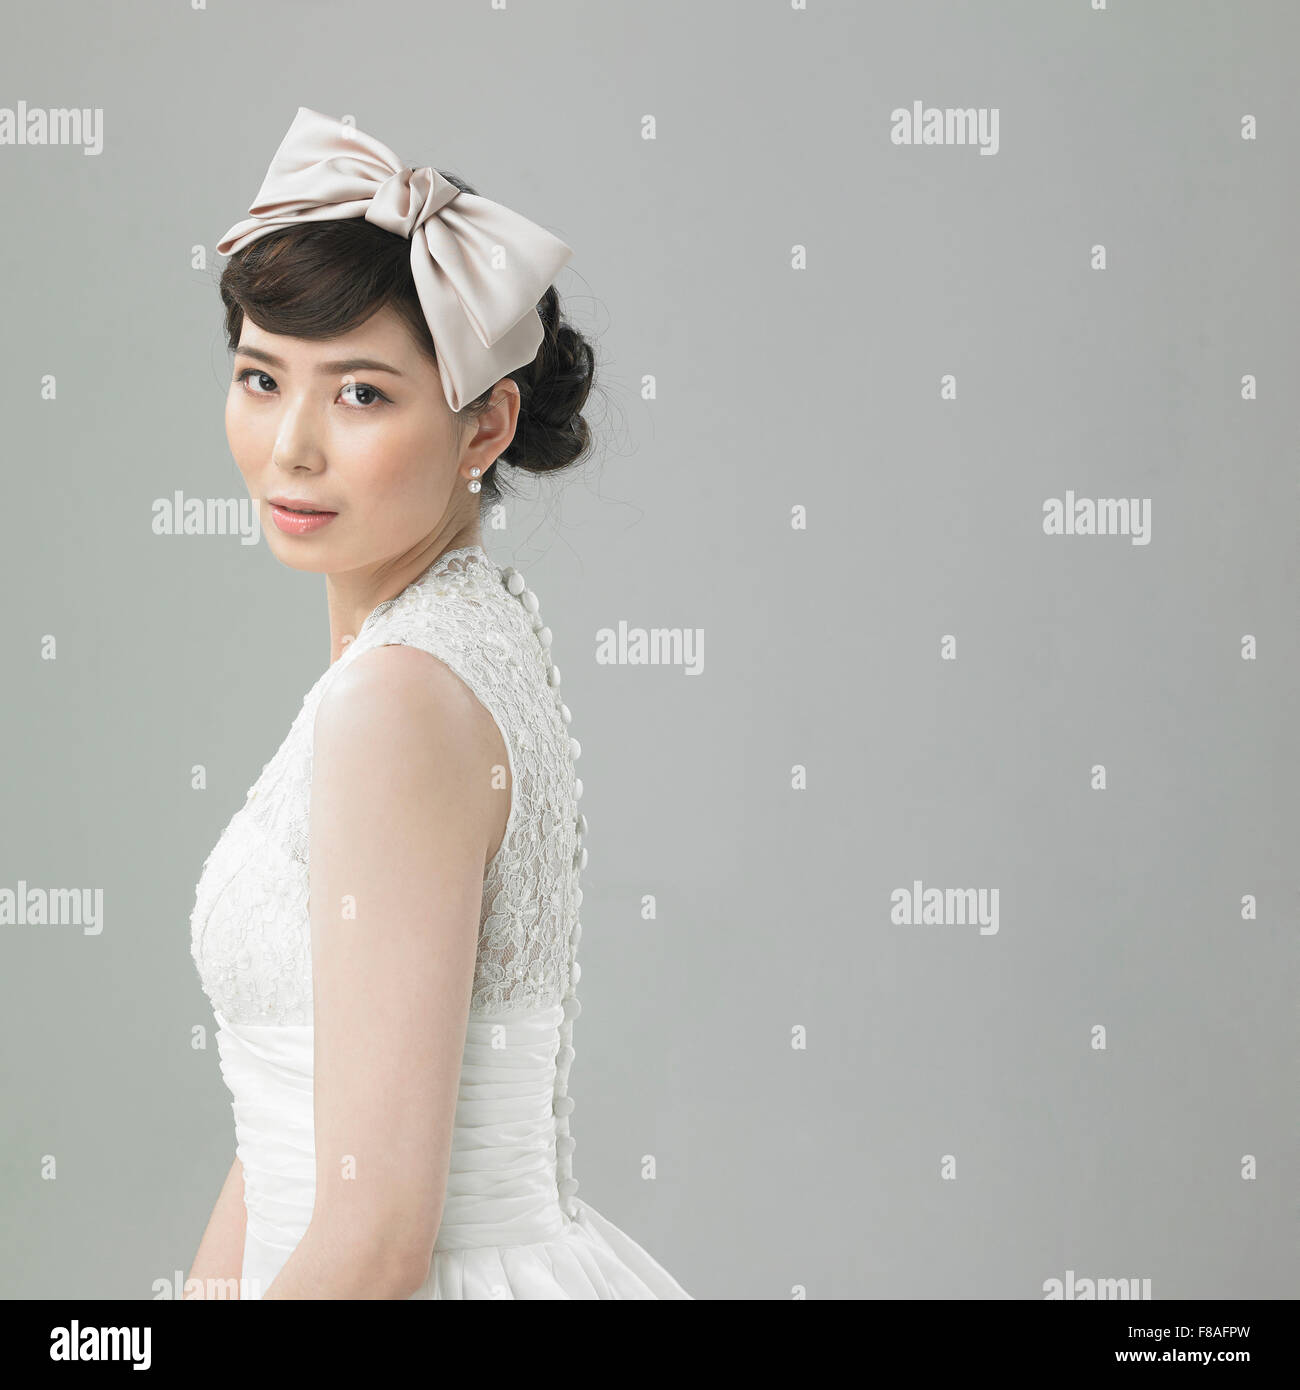 Woman in wedding dress with hair band Stock Photo